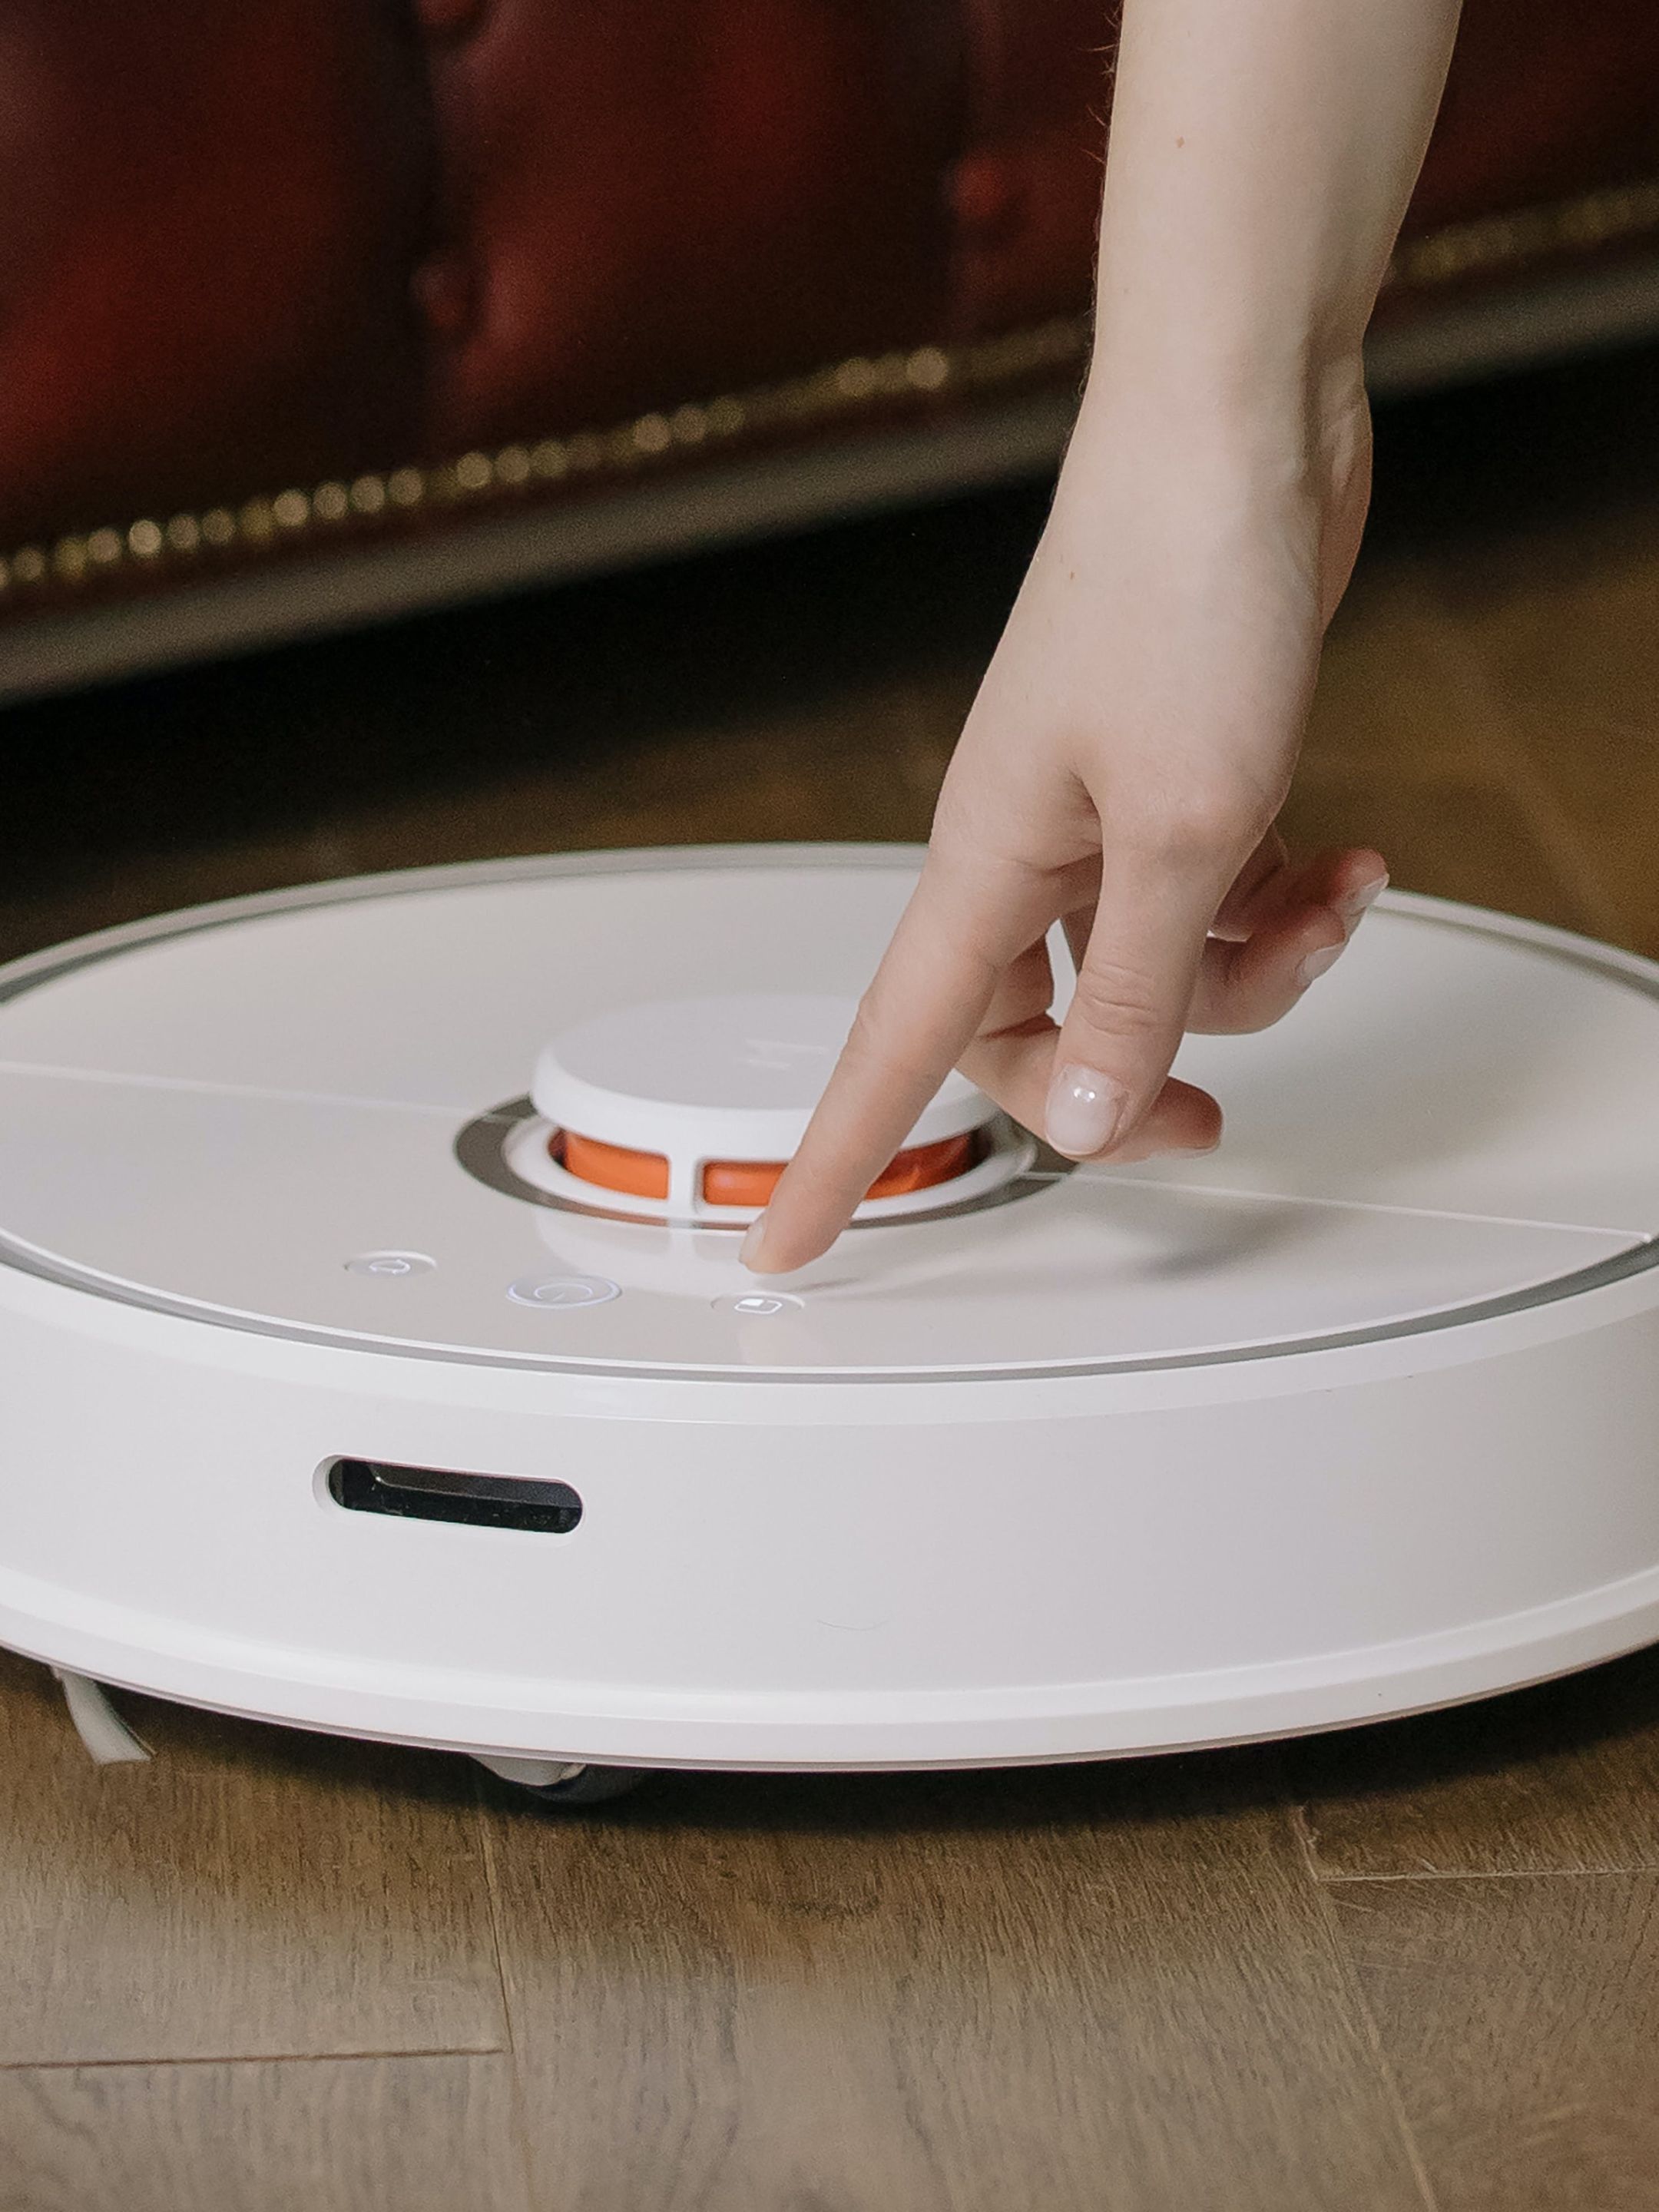 How to Keep Your Robot Vacuum from Going Down stairs